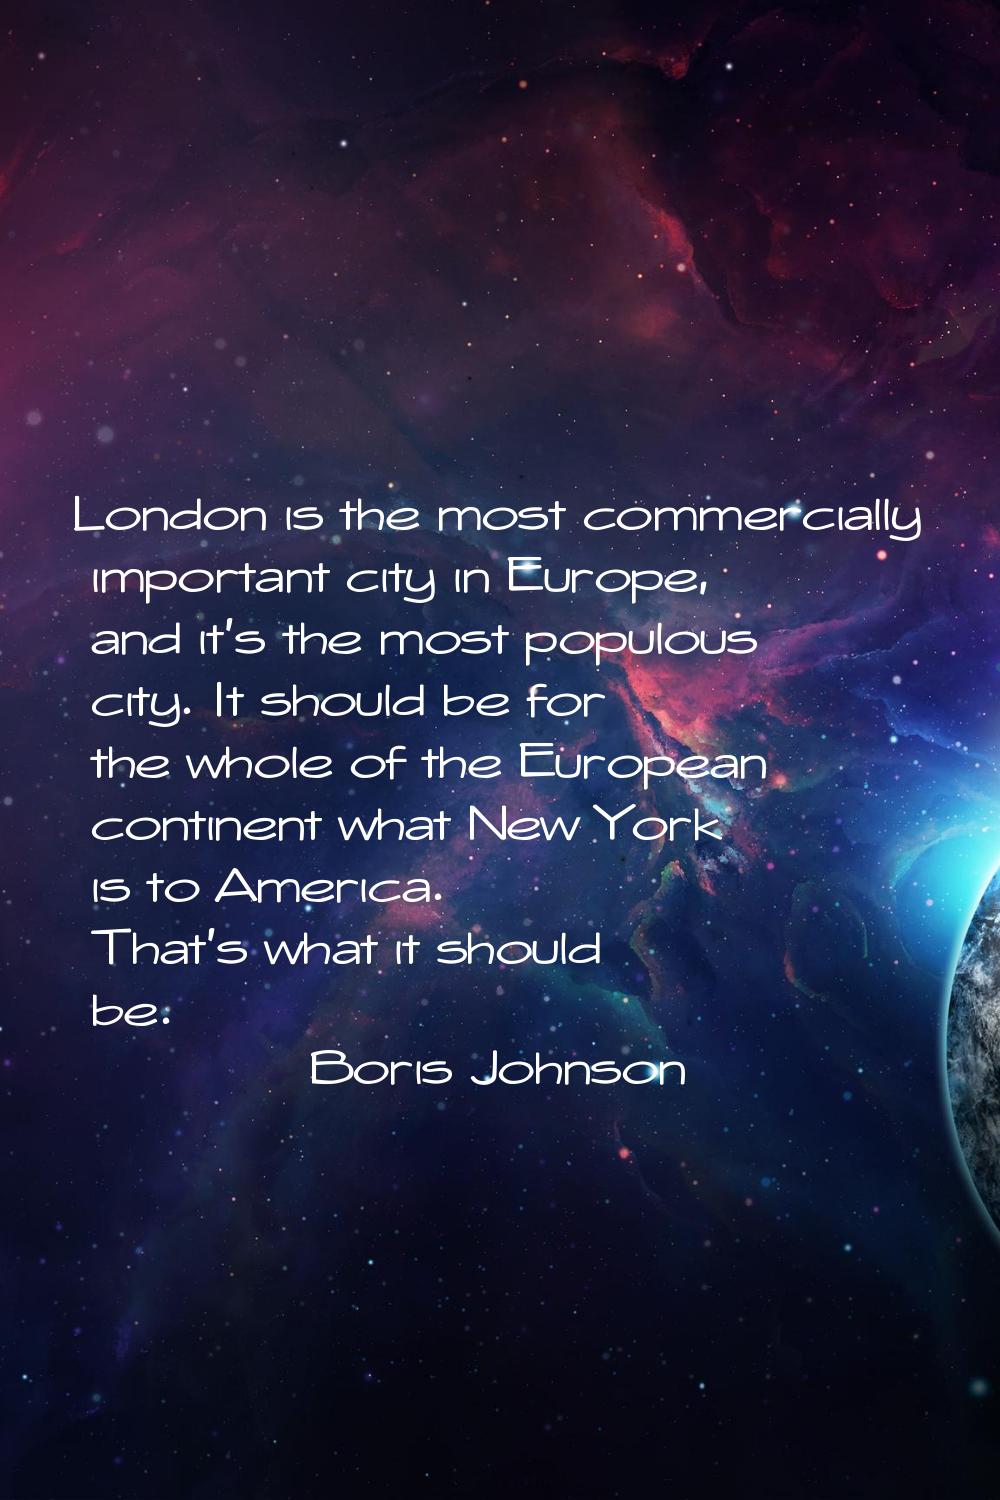 London is the most commercially important city in Europe, and it's the most populous city. It shoul